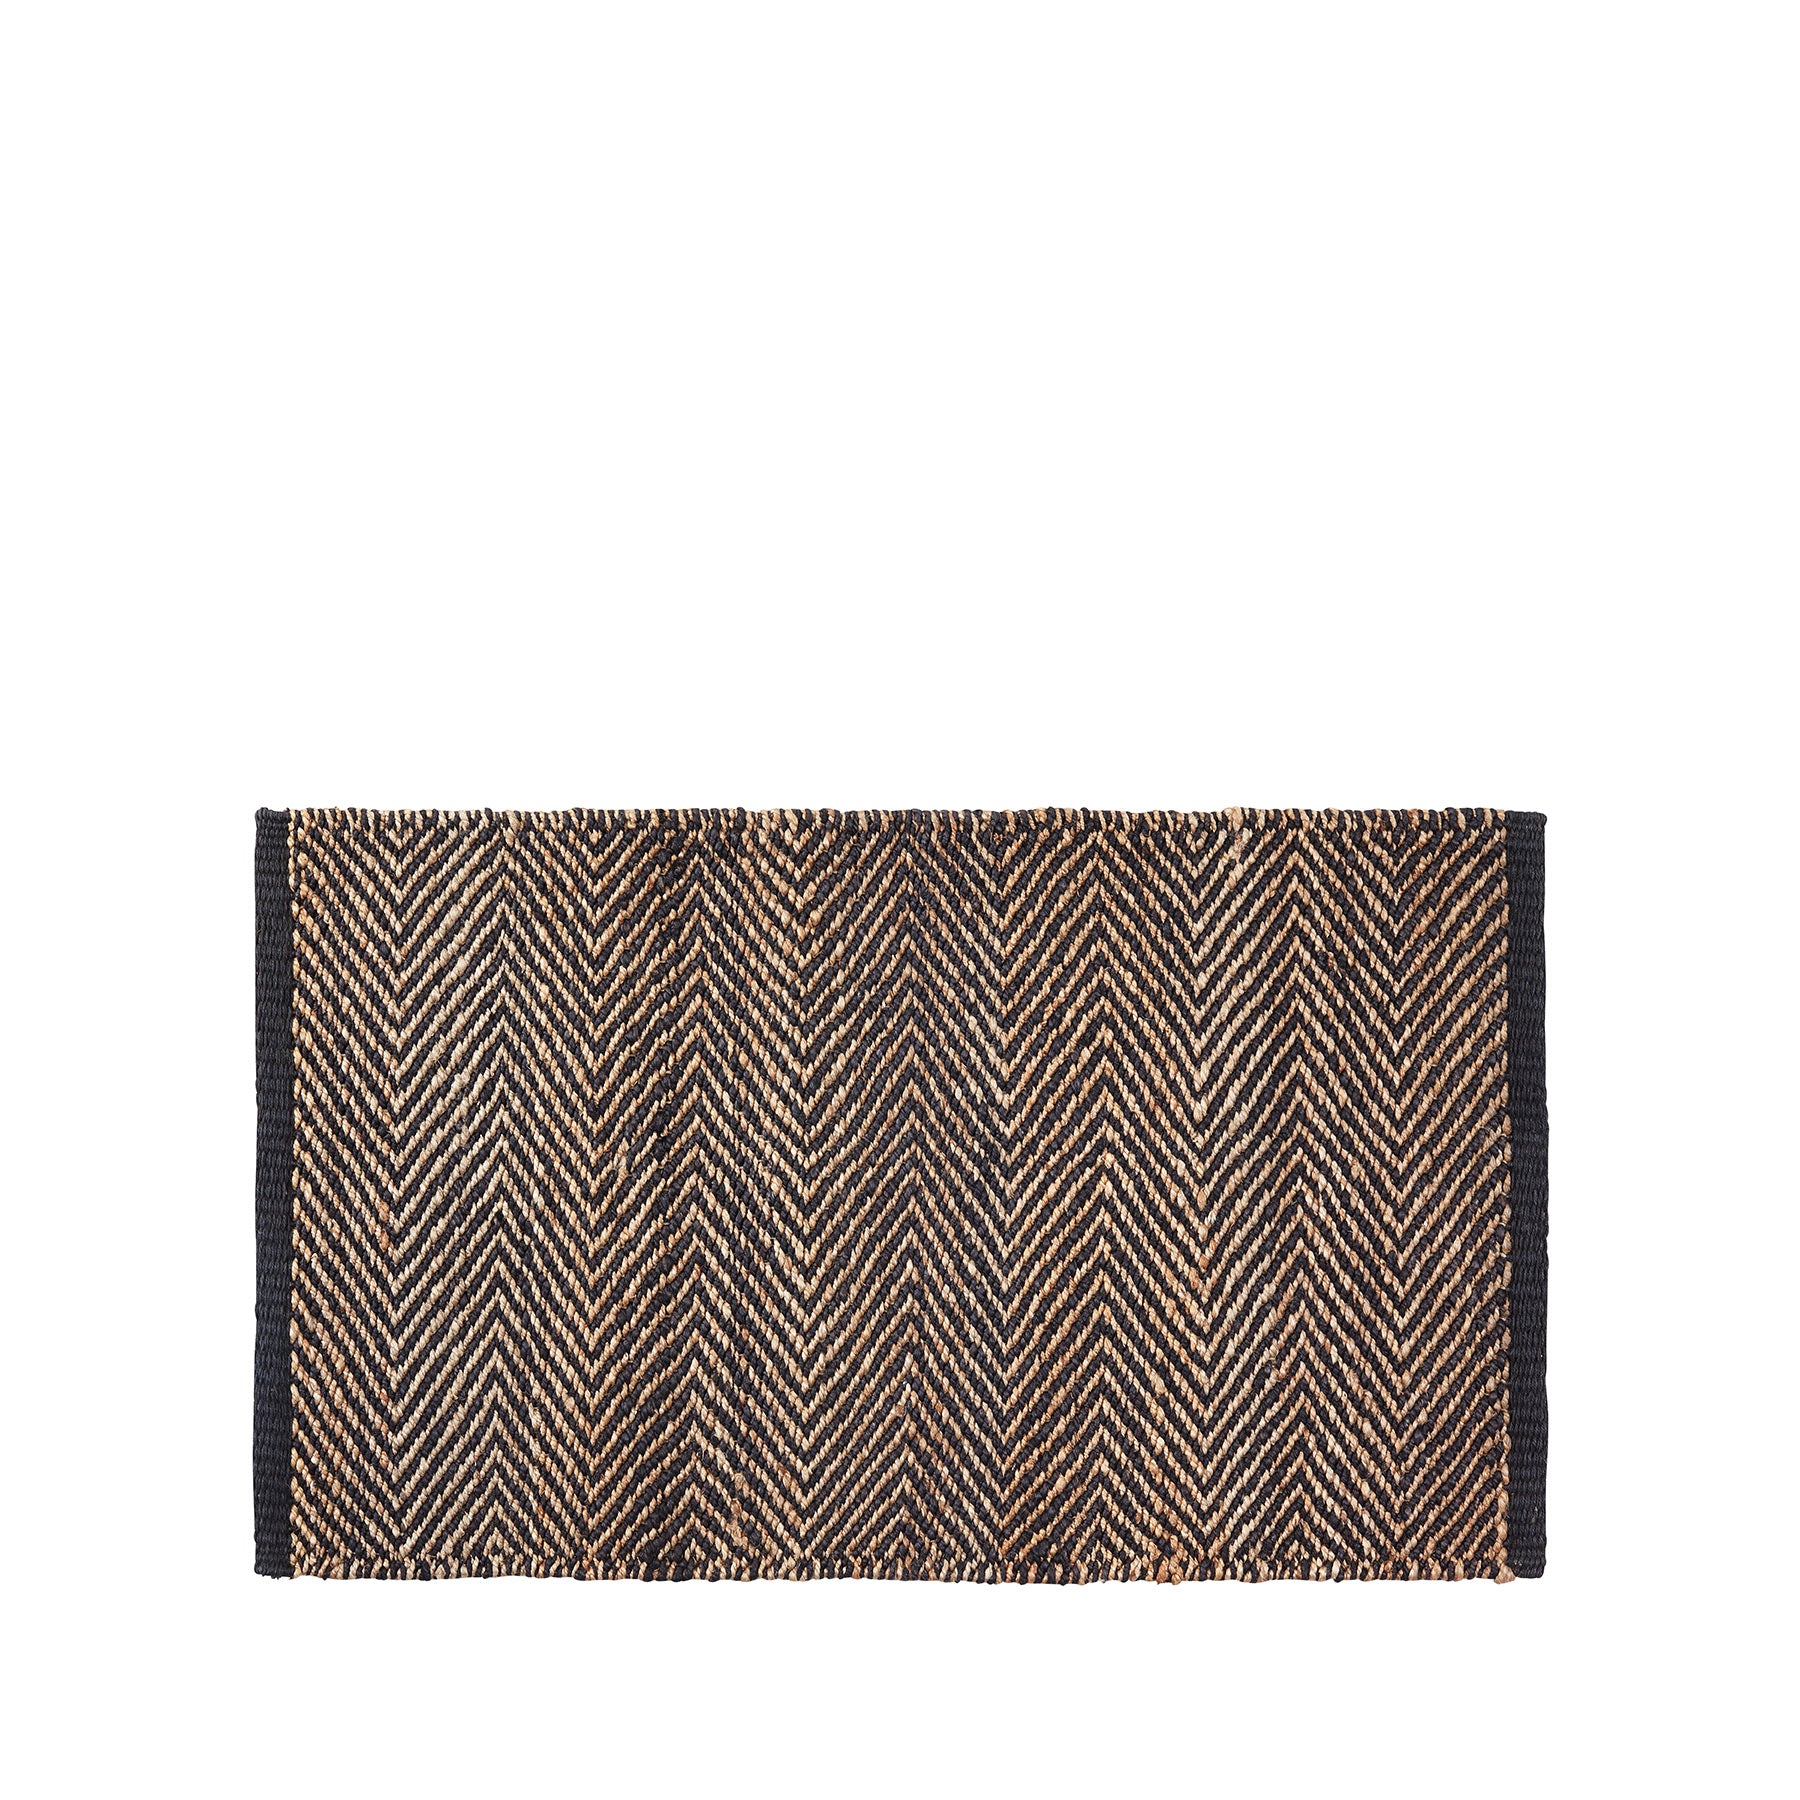 Serengeti Weave Entrance Mat in Charcoal and Natural Zoom Image 1